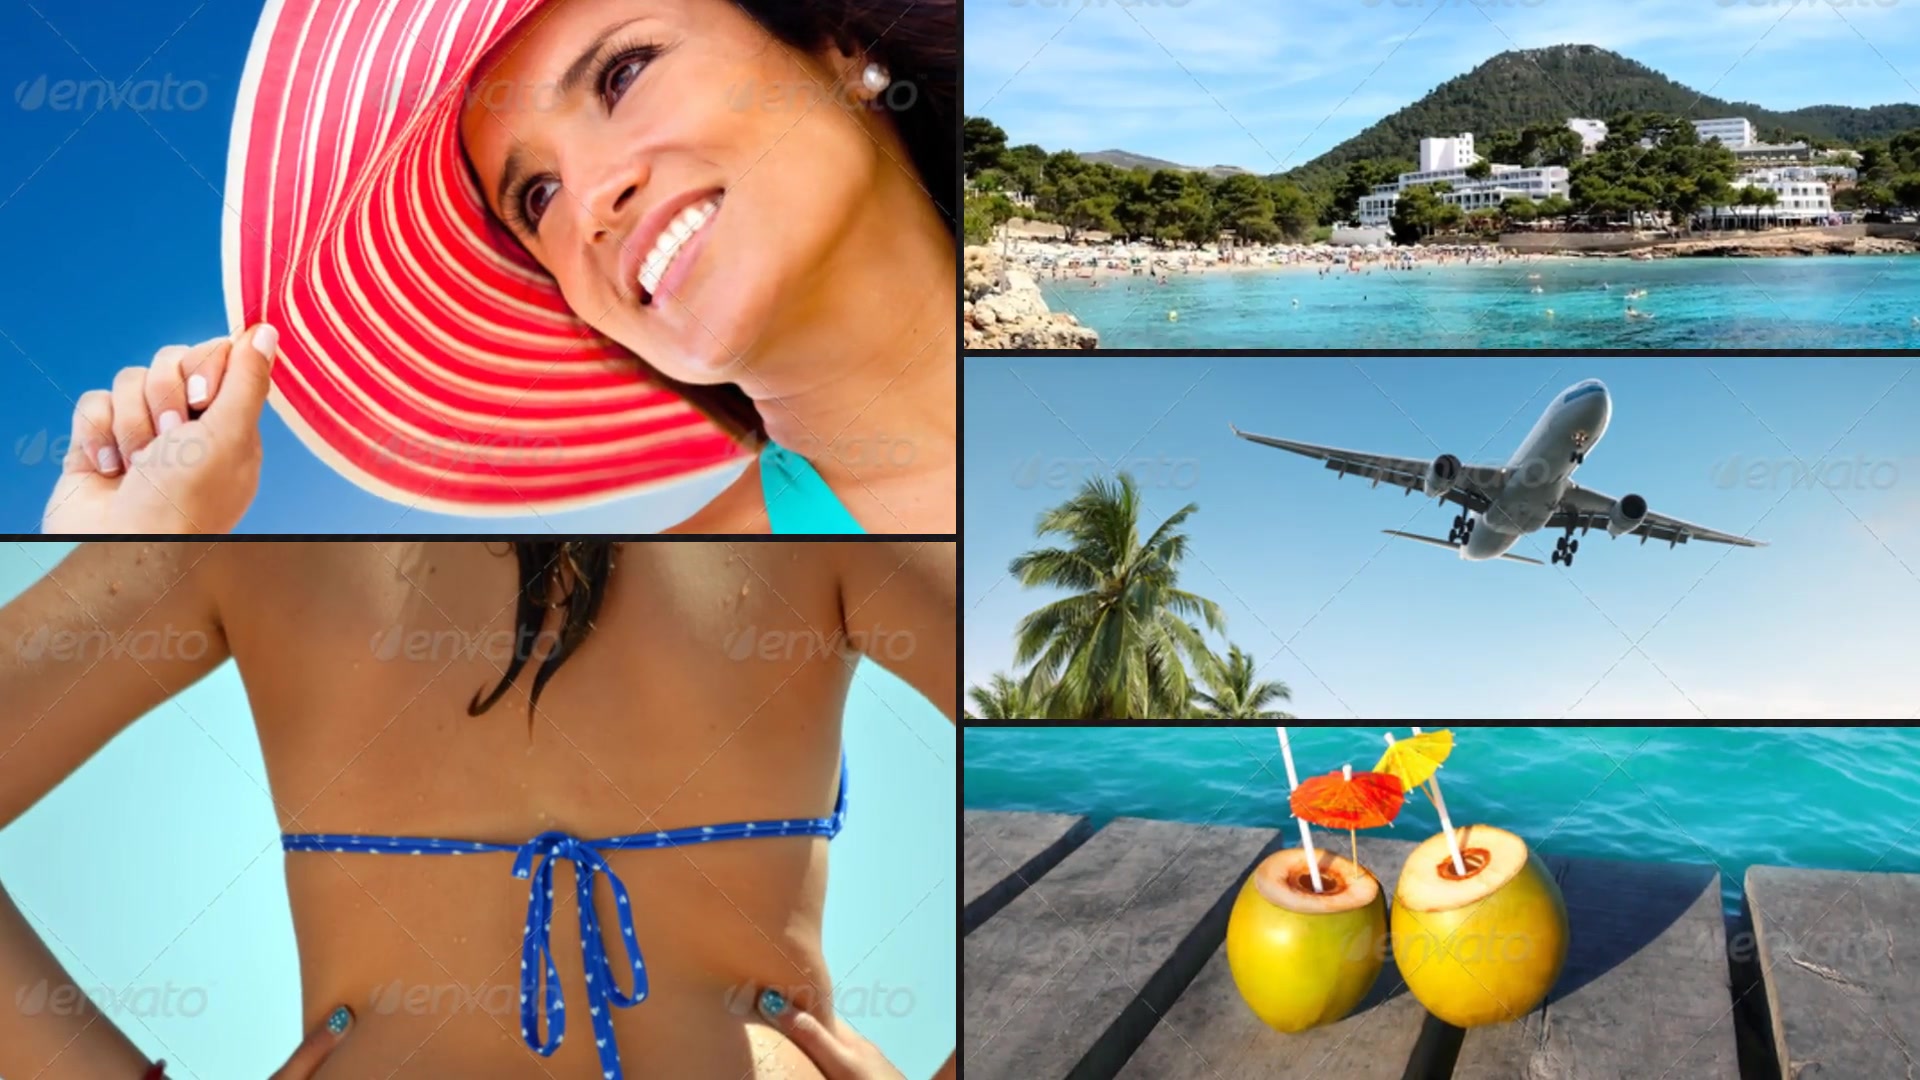 Slideshow clean colors - Download Videohive 8981350